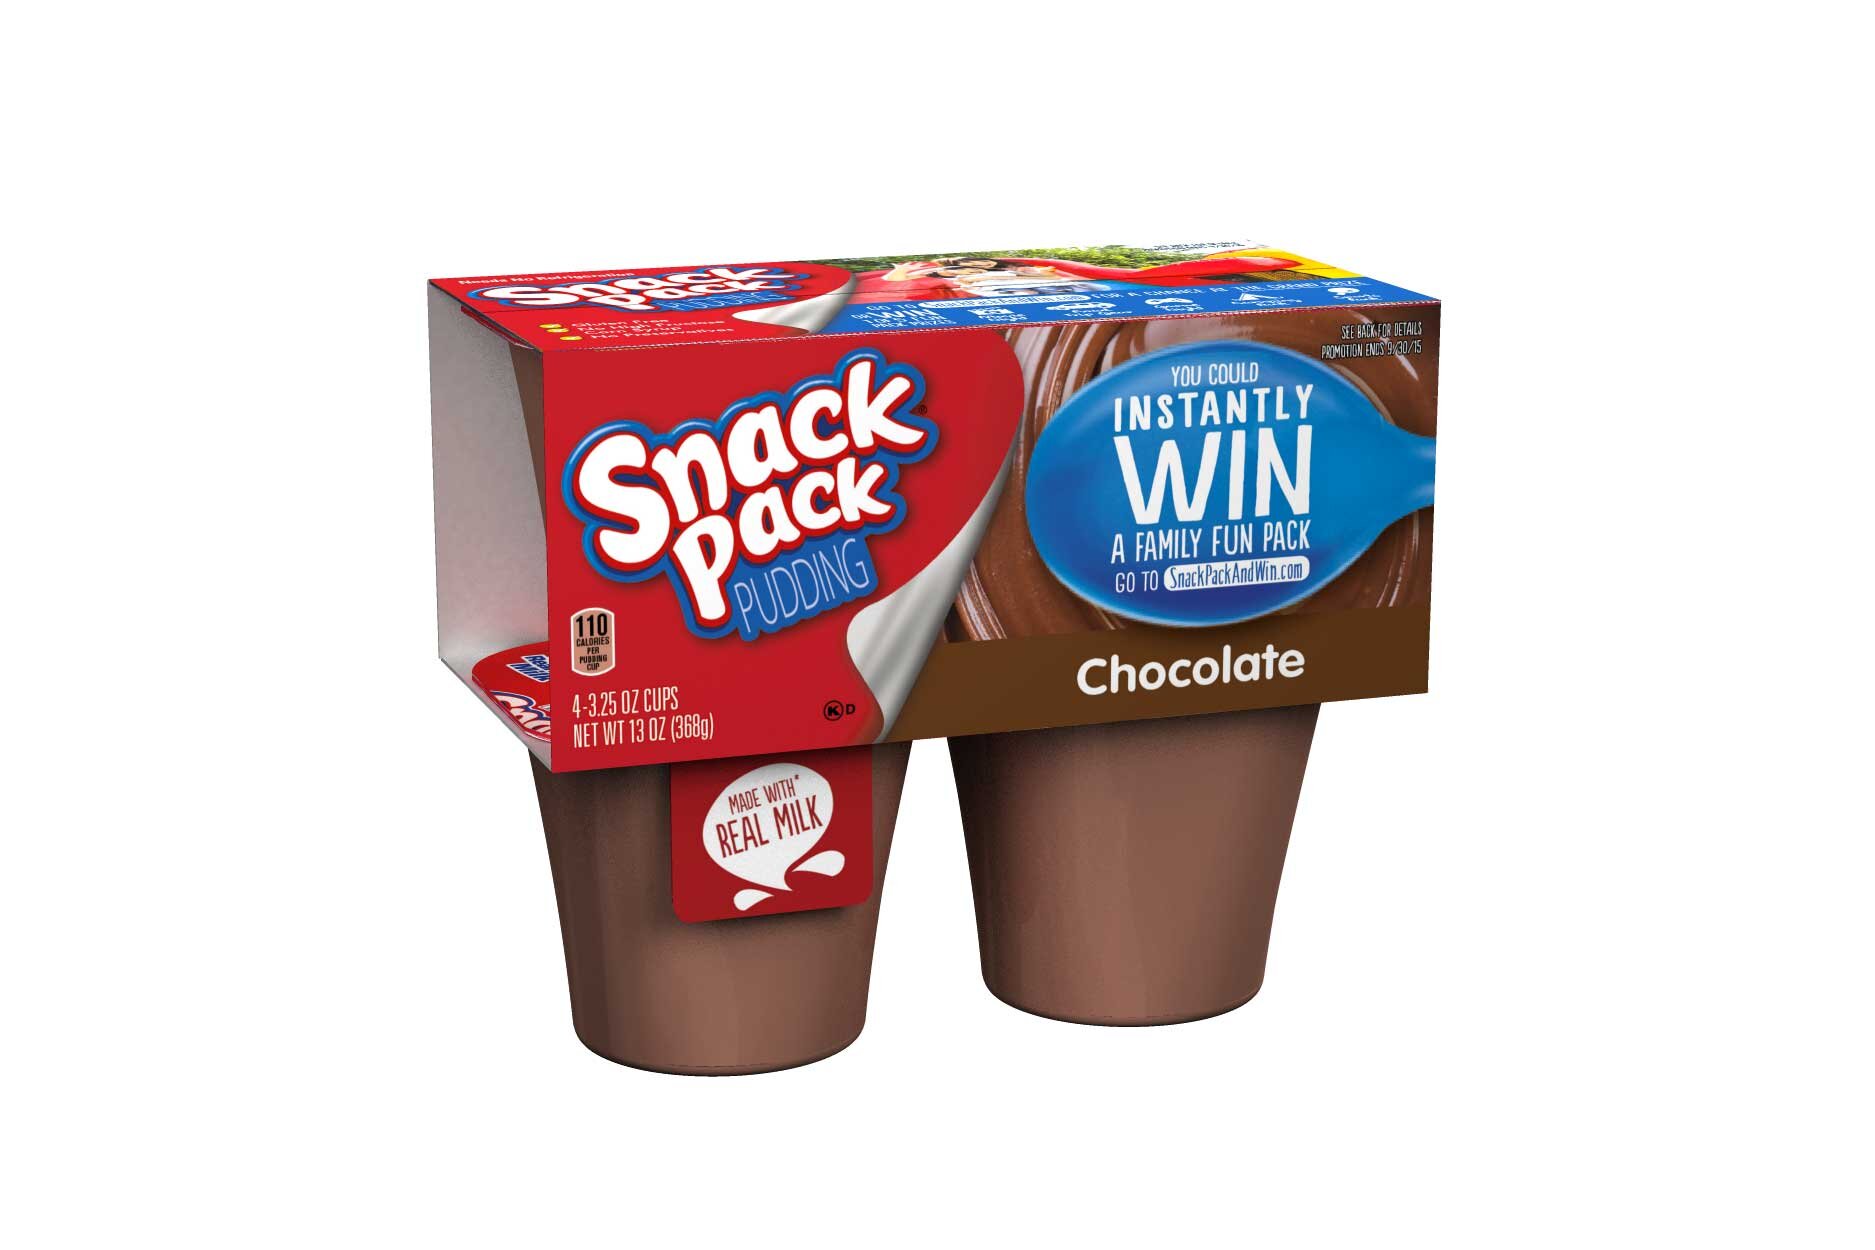 Snack pack promotions